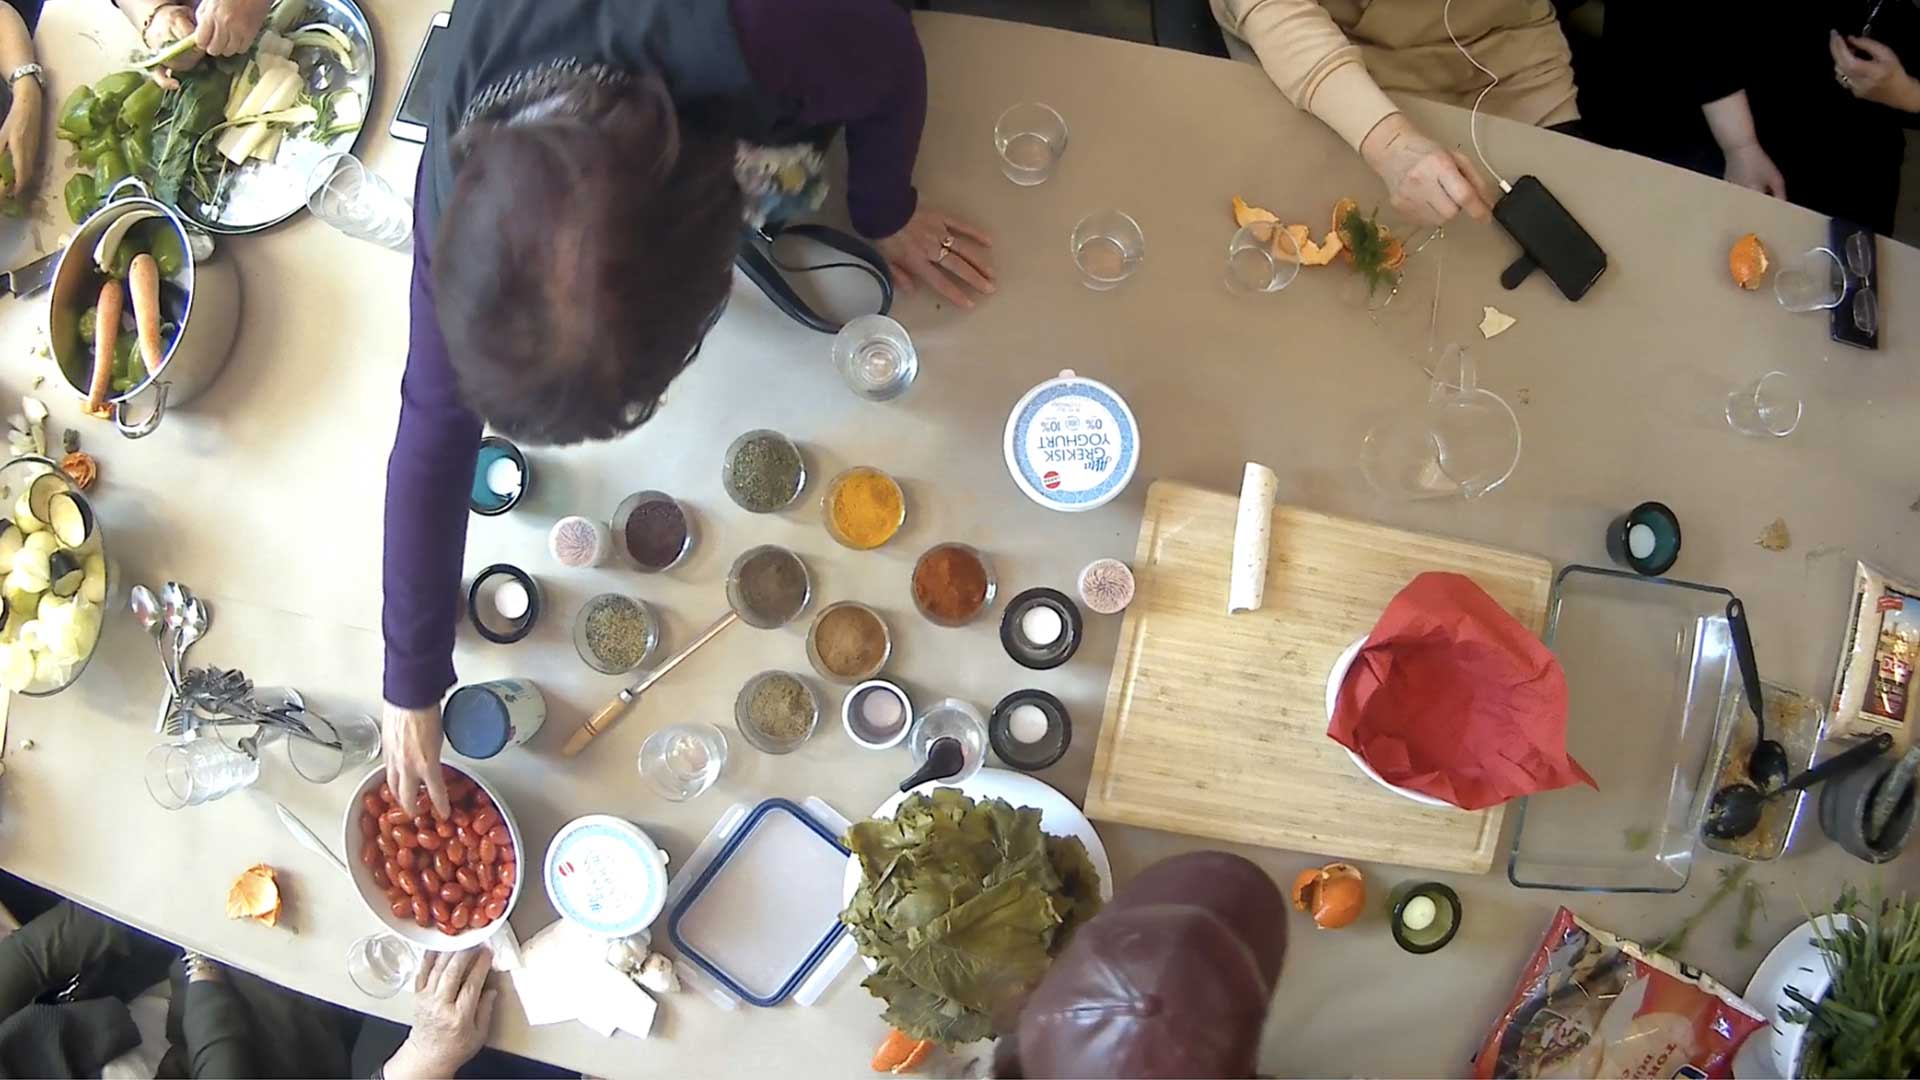 Top view photo of a table with people preparing food